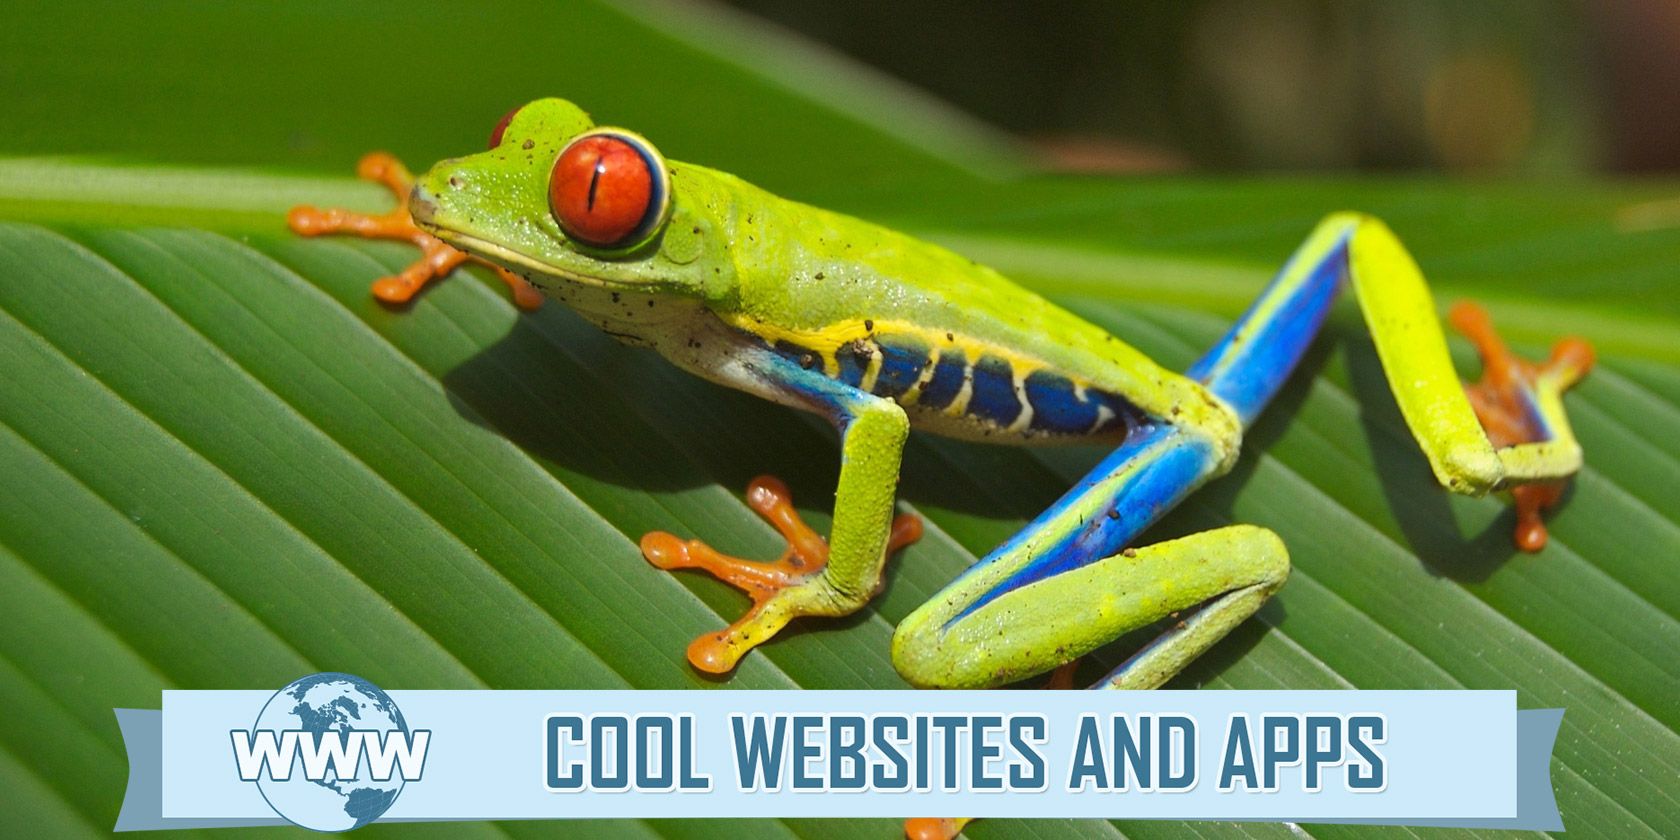 5 Sites That Bring The Natural World to Your PC, Phone or Tablet